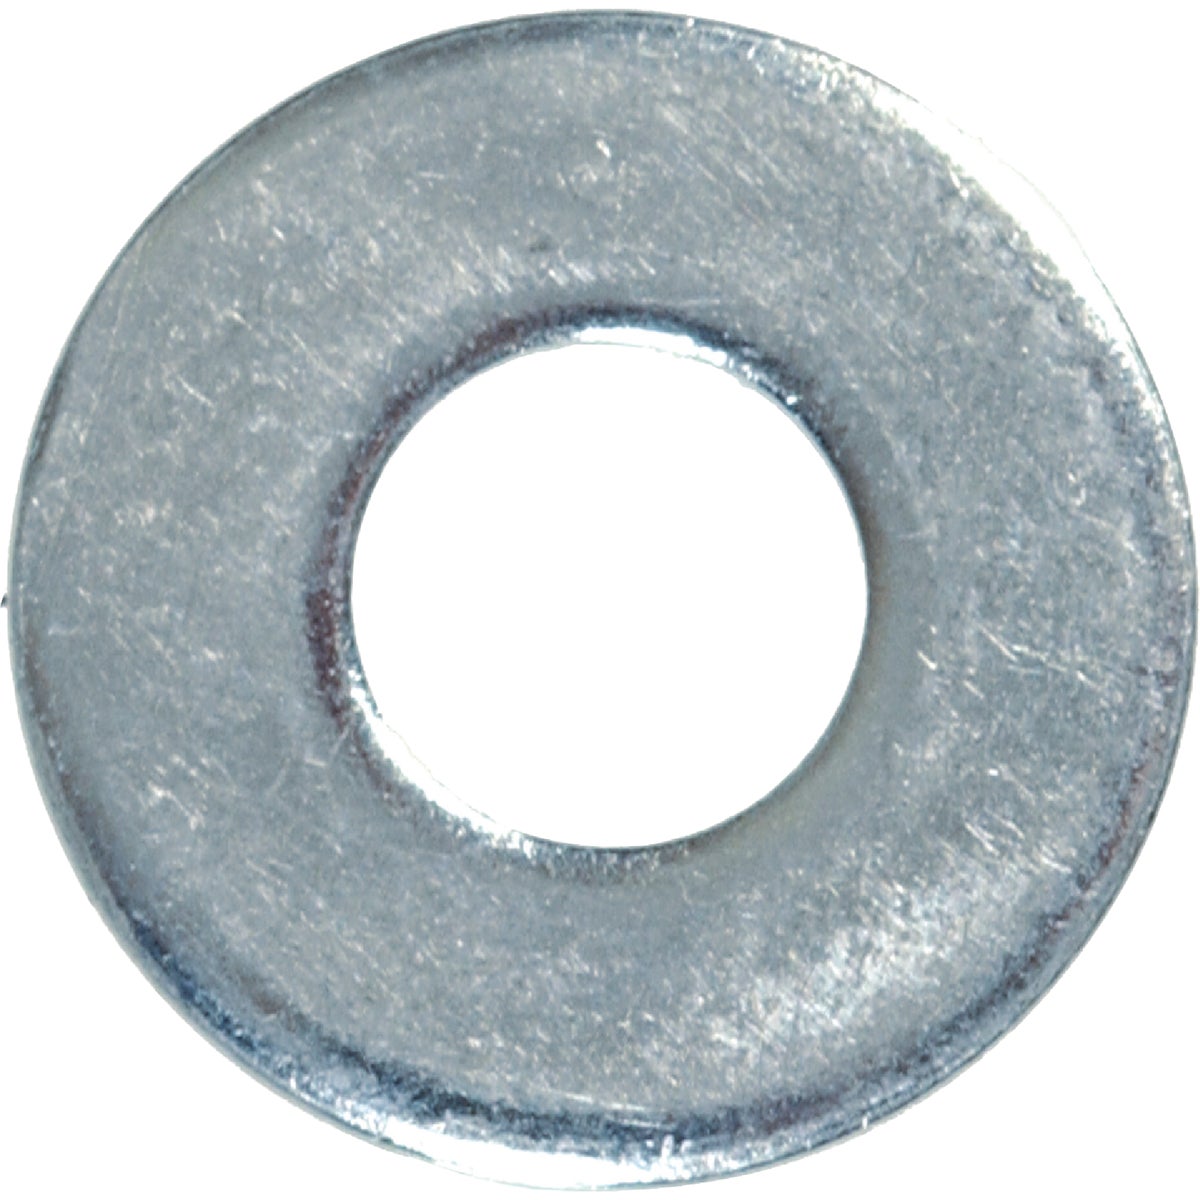 Item 710598, Flat washers are great for adding resistance to your bolts and screws to 